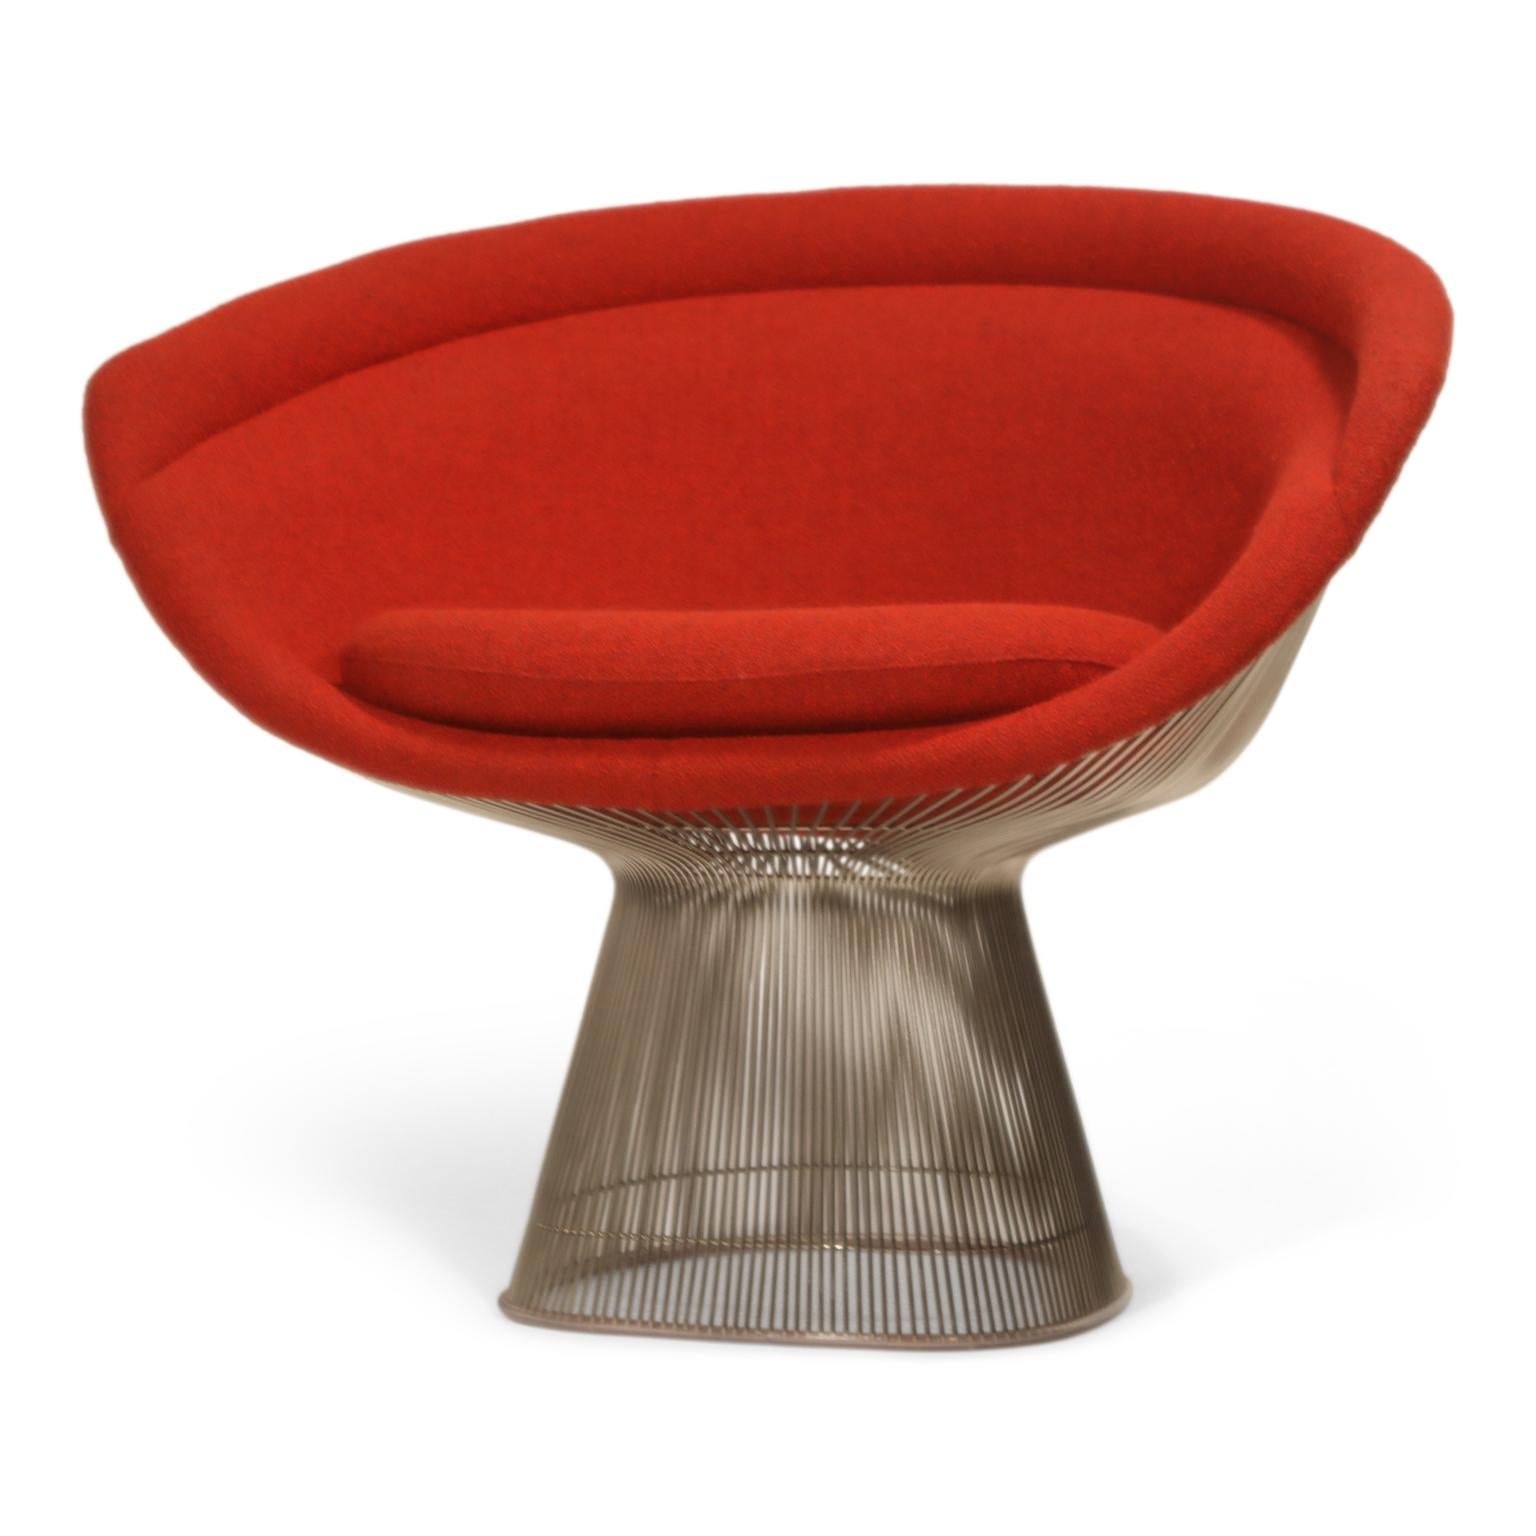 Warren Platner for Knoll Lounge Chairs in Red Wool Boucle 1